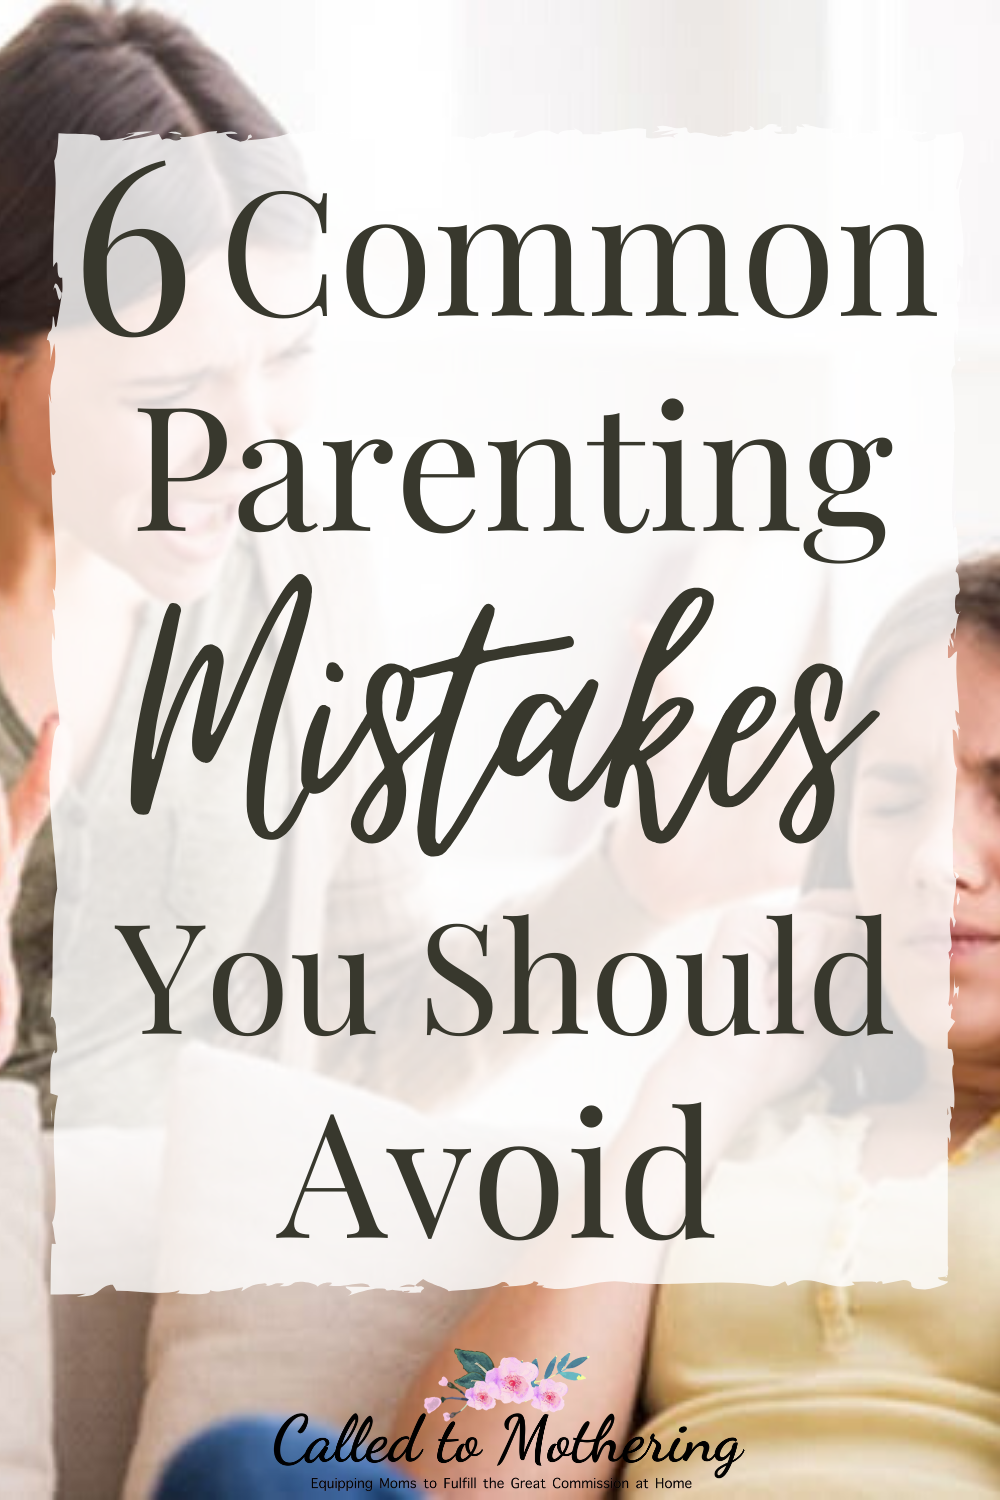 Learn to avoid making these six common parenting mistakes that cause problem behaviors in your kids and family strife. #parentingtips #parentinghacks